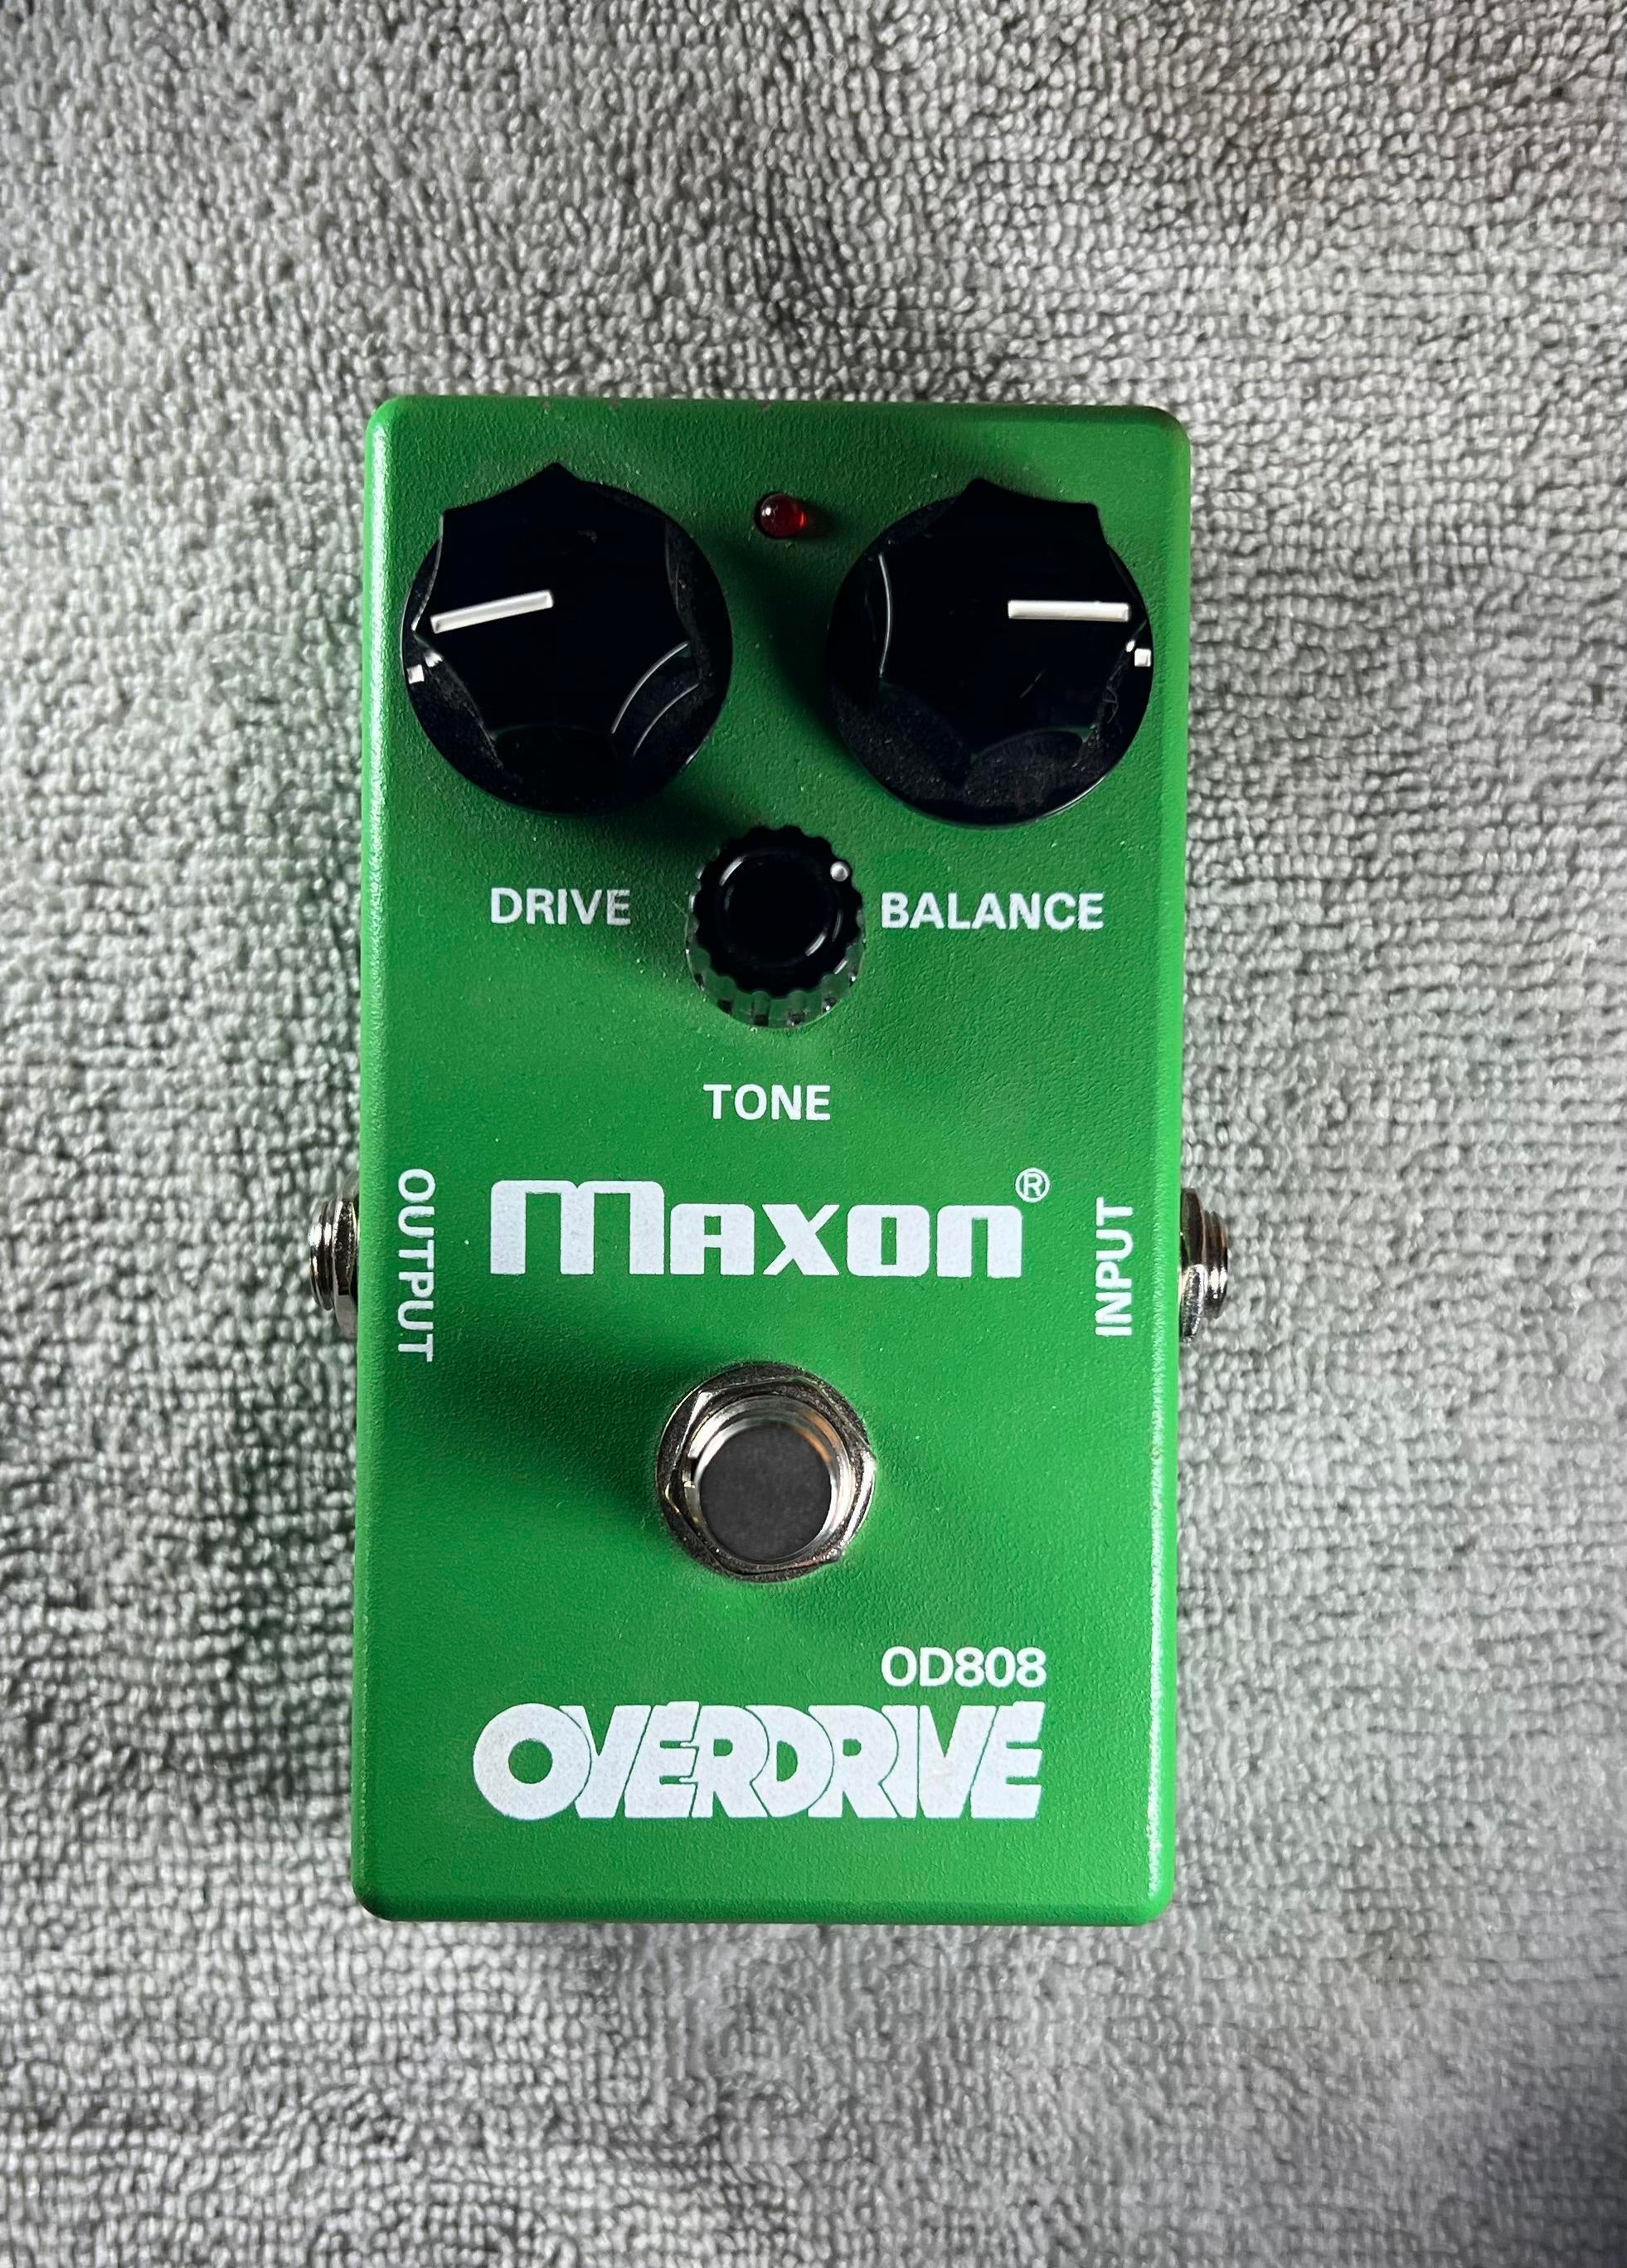 Used Maxon OD808 Overdrive Pedal - Sweetwater's Gear Exchange